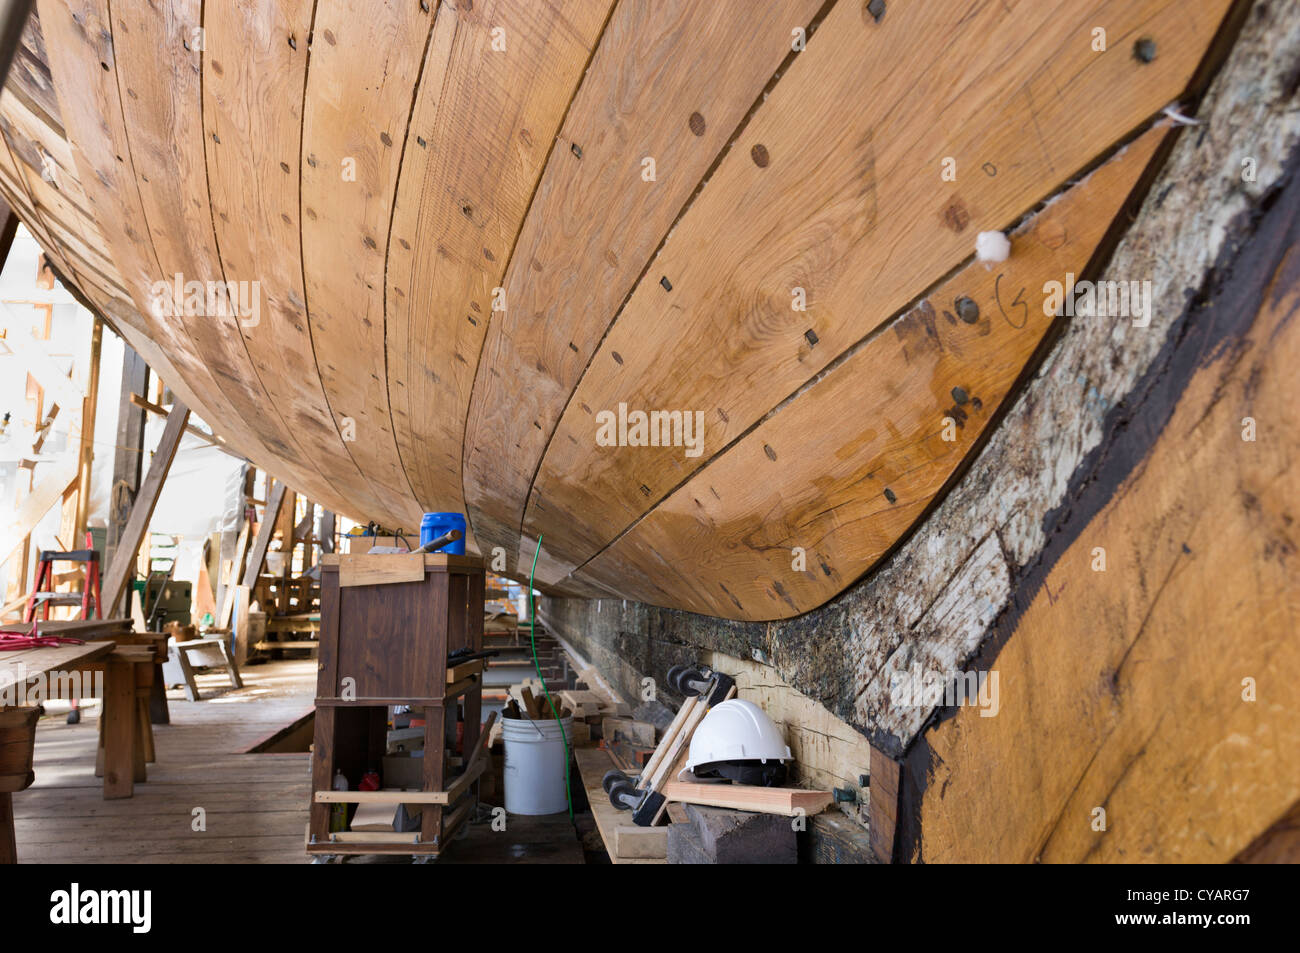 THE CHARLES W. MORGAN WHALESHIP RESTAURATION MYSTIC SEAPORT MYSTIC CONNECTICUT Stock Photo